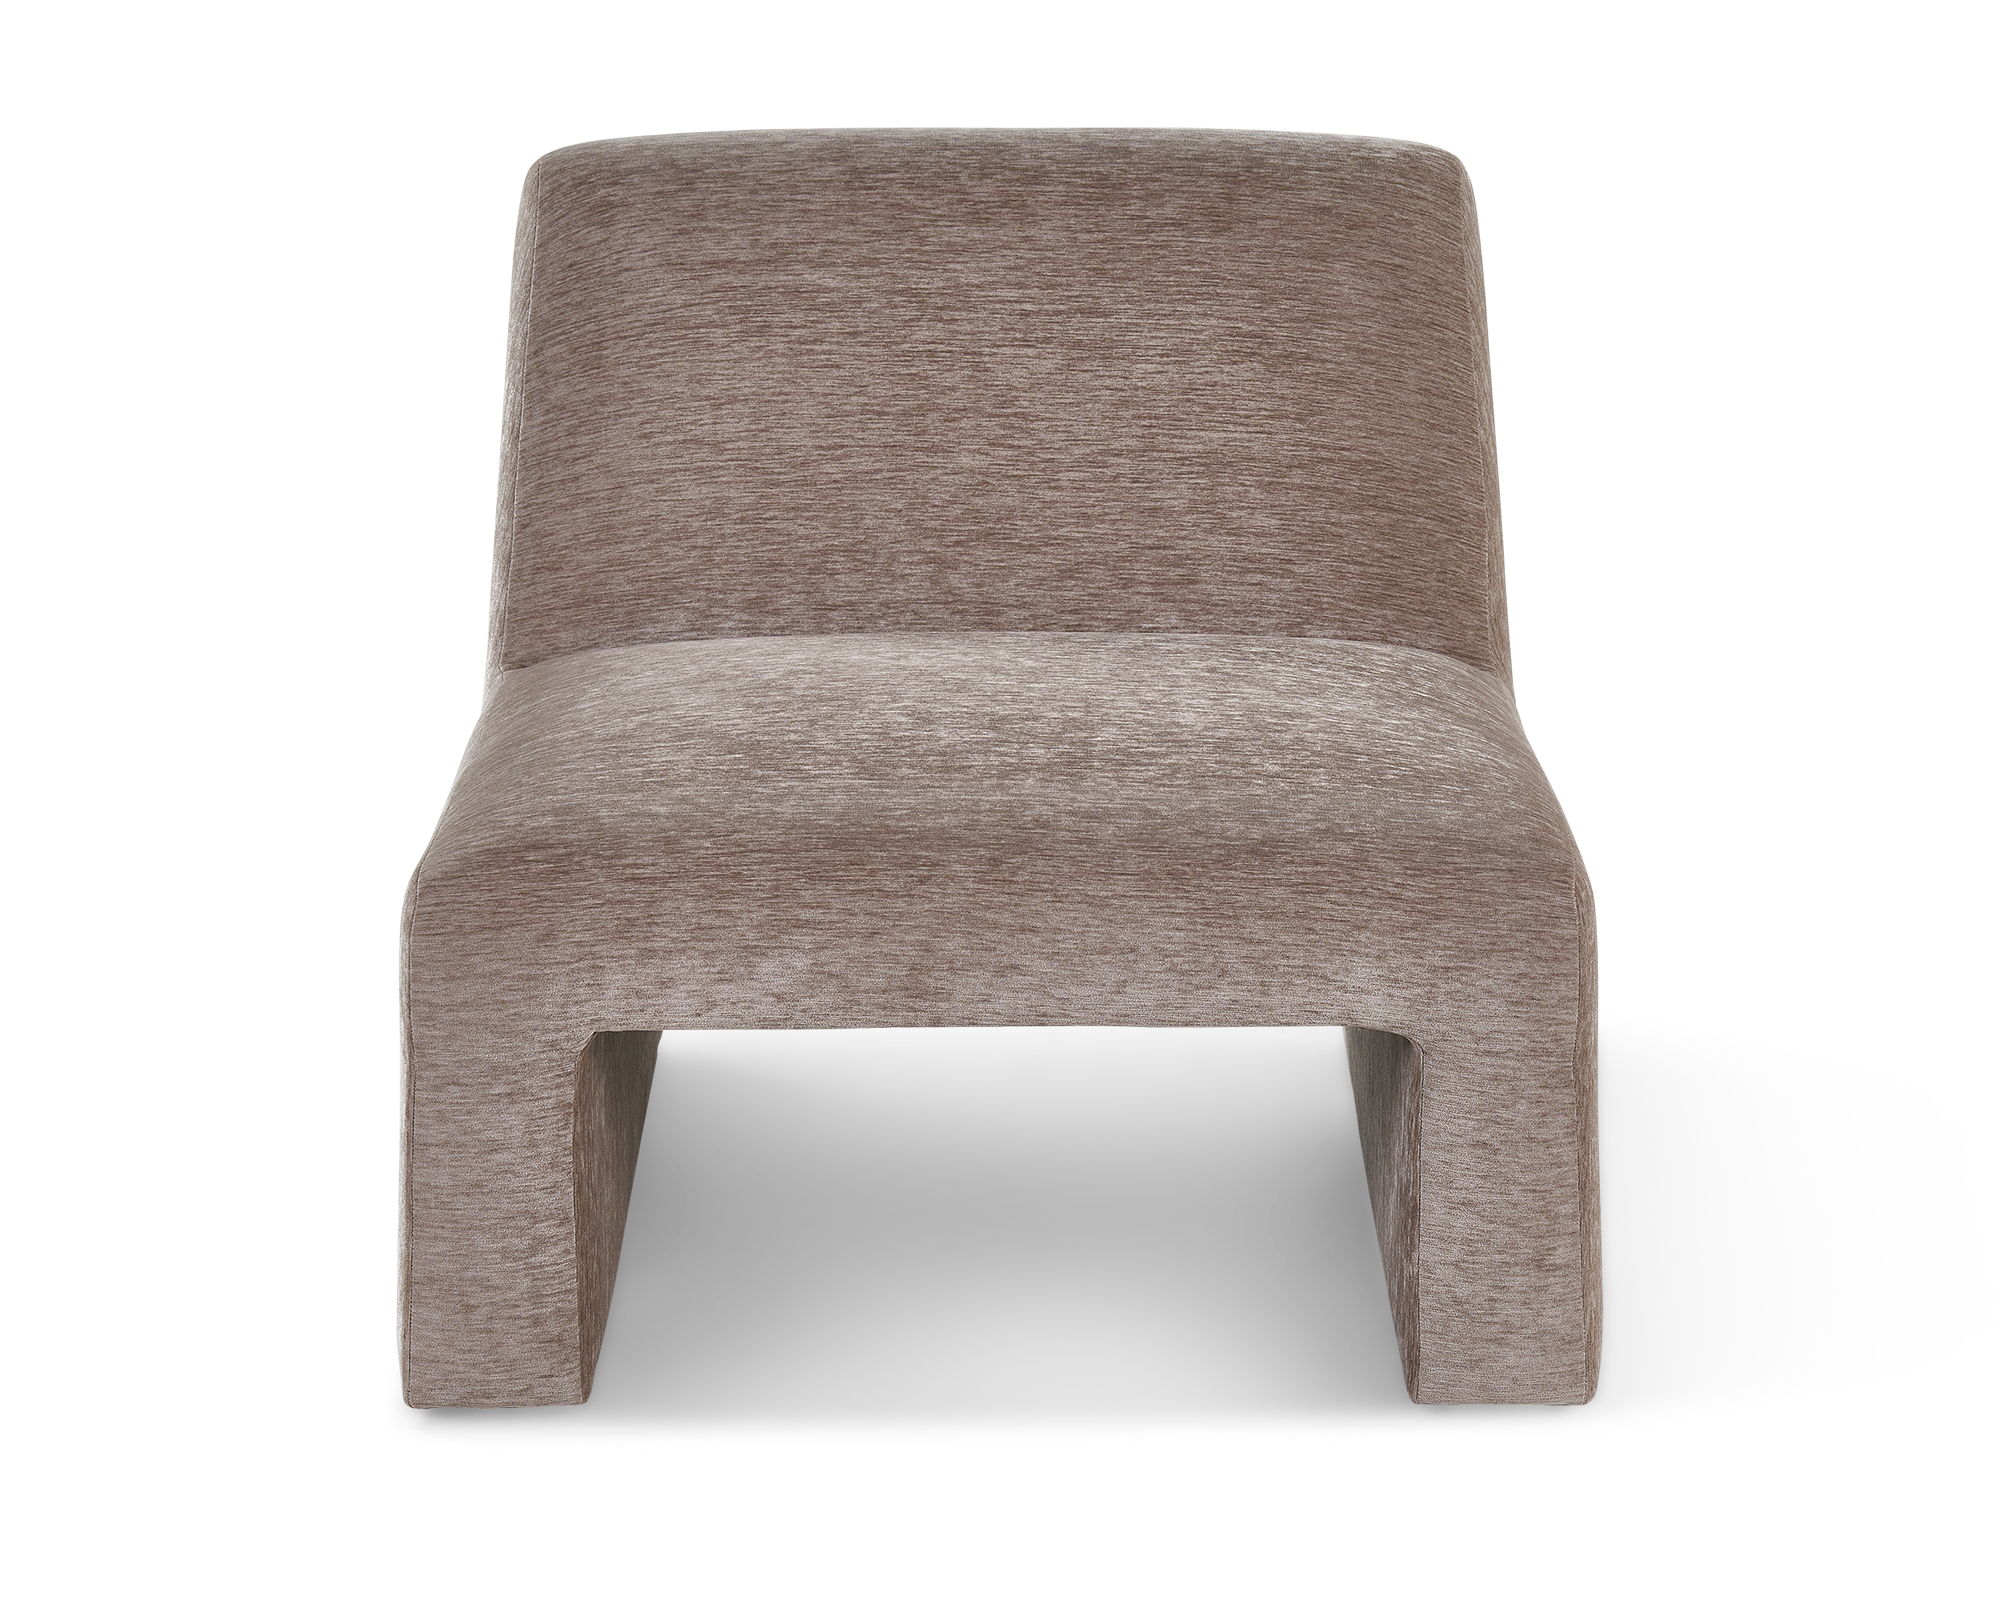 LE001-OCH-557 – L&E – Arnot Occasional Chair – Sysley Earth – 2000 x 1600 – 2